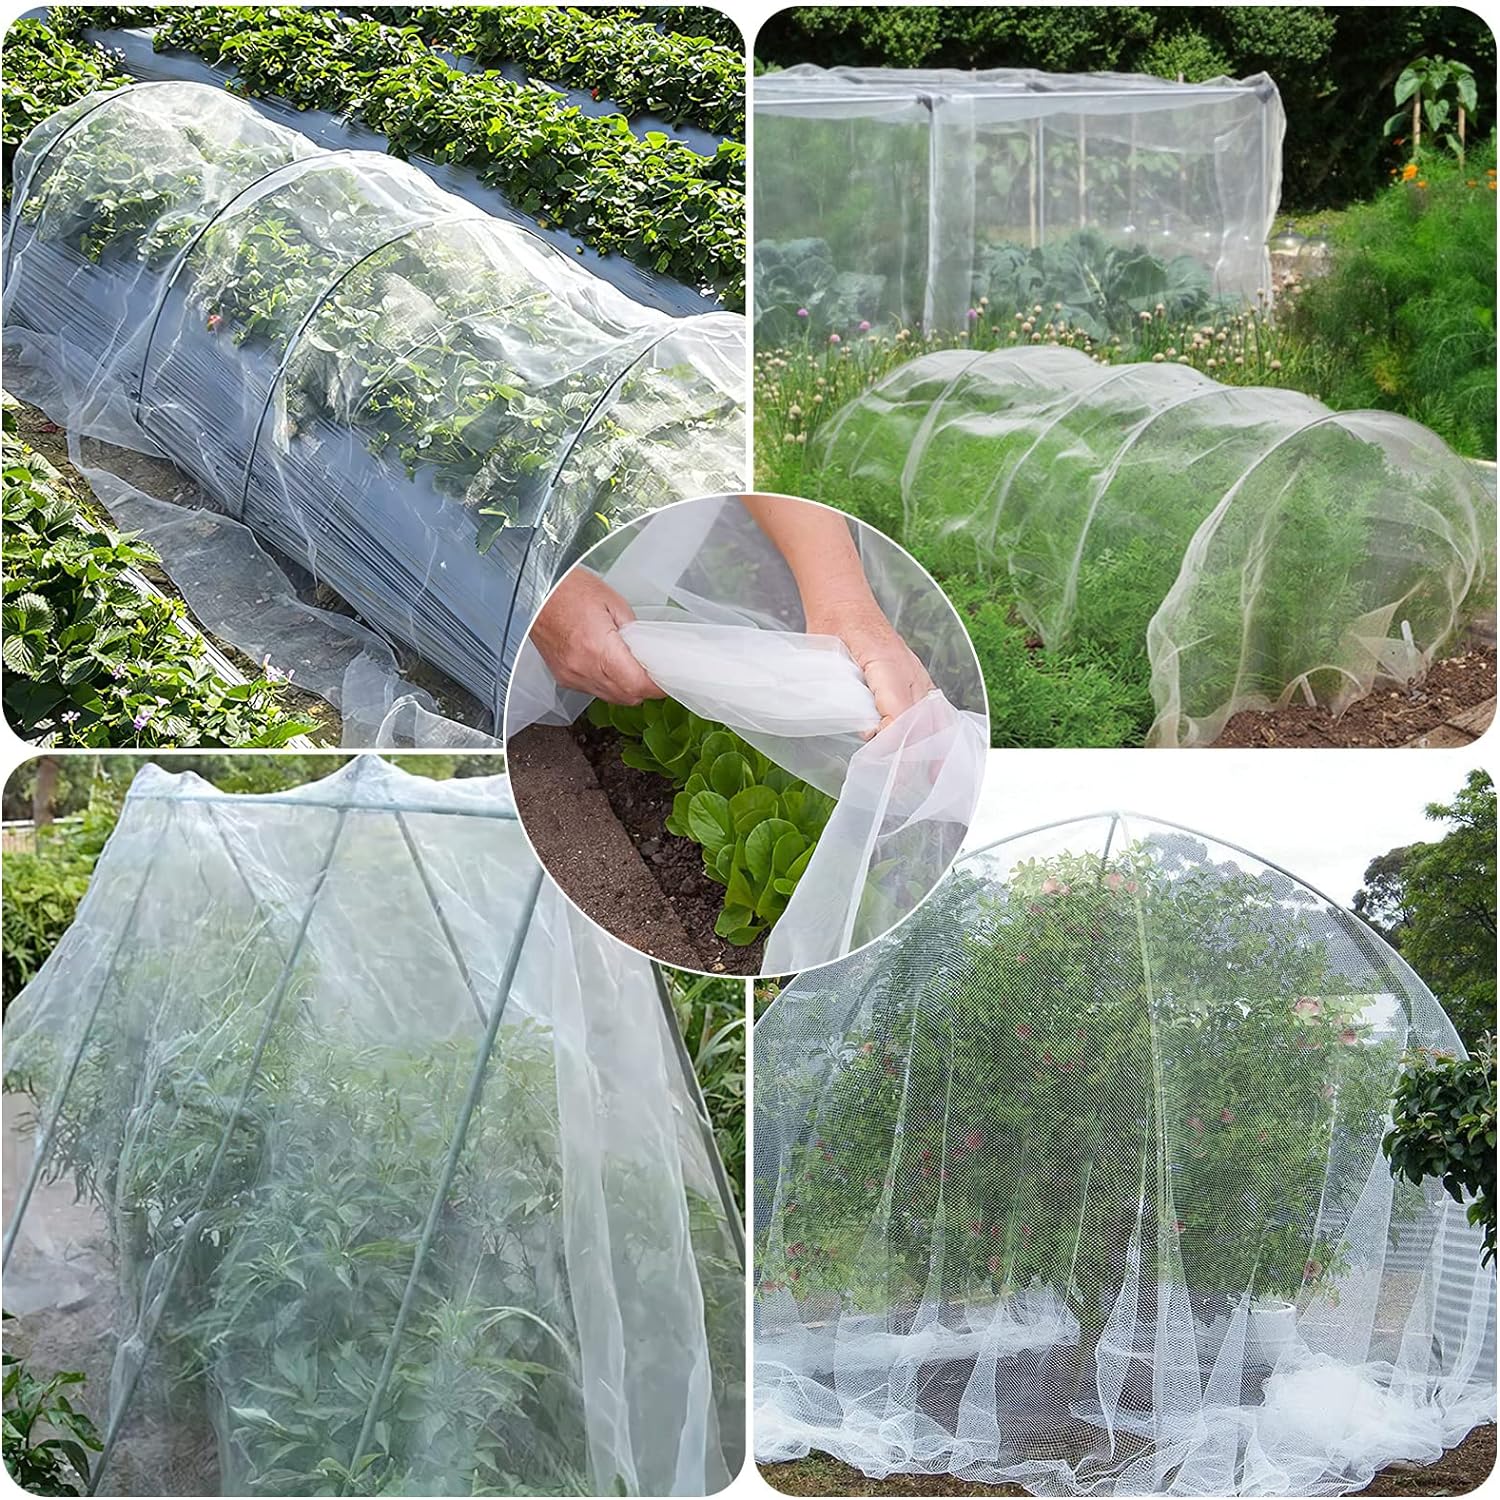 Garden Netting Pest Barrier Mosquito Netting Plant Cover 10x6.5FT Ultra Fine Garden Mesh Netting Protection Net, Vegetable Row Cover Shrubs Fruits Tree Flowers Crops Raised Bed Screen Insect Bug Mesh